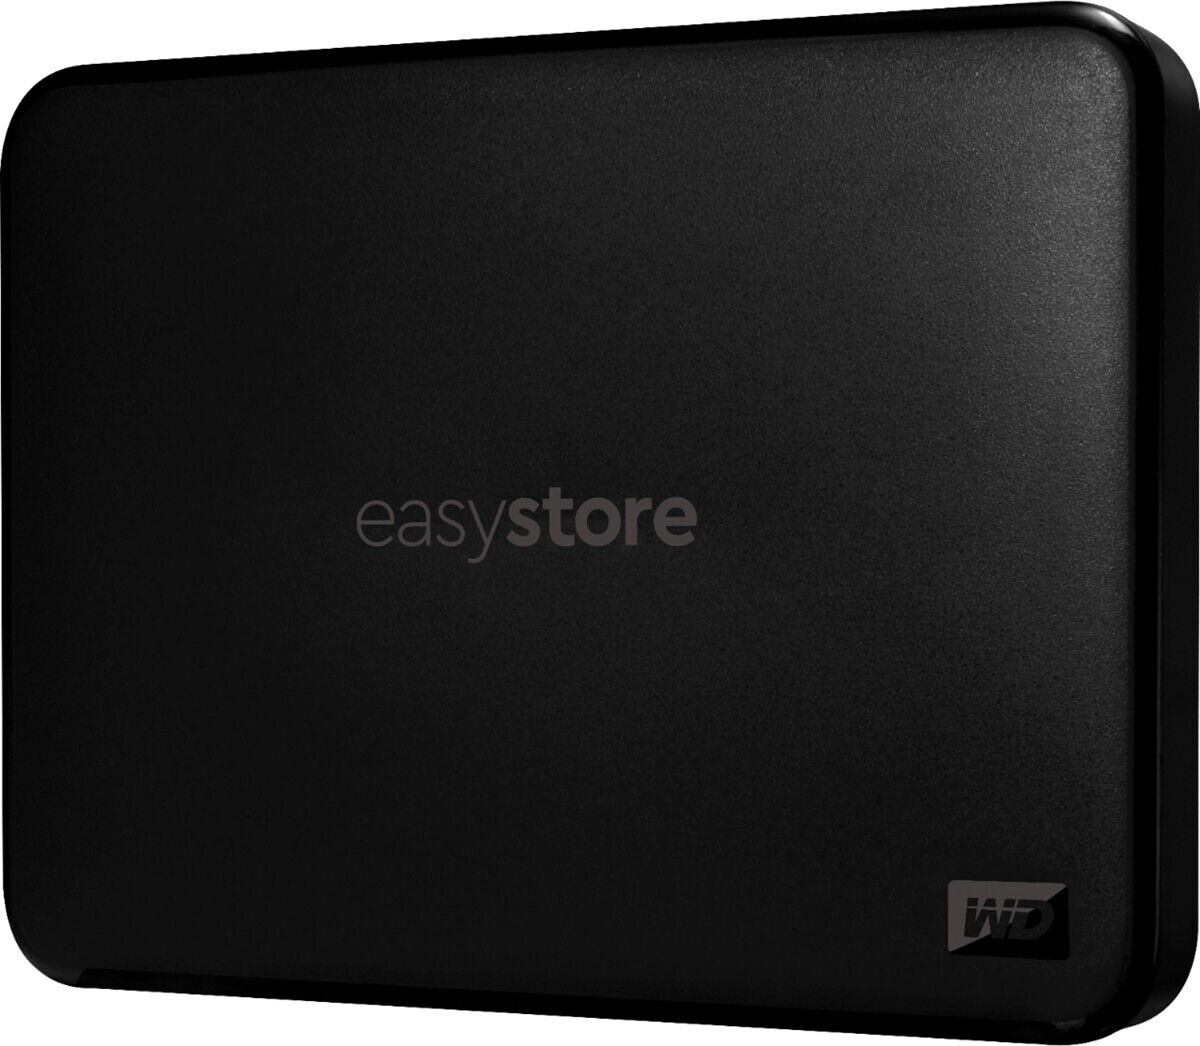 Back up your data and know it's safe when you buy a WD product. The easystore 1TB external hard drive is only $48 at Best Buy, and you can back up your important data safely and effectively.